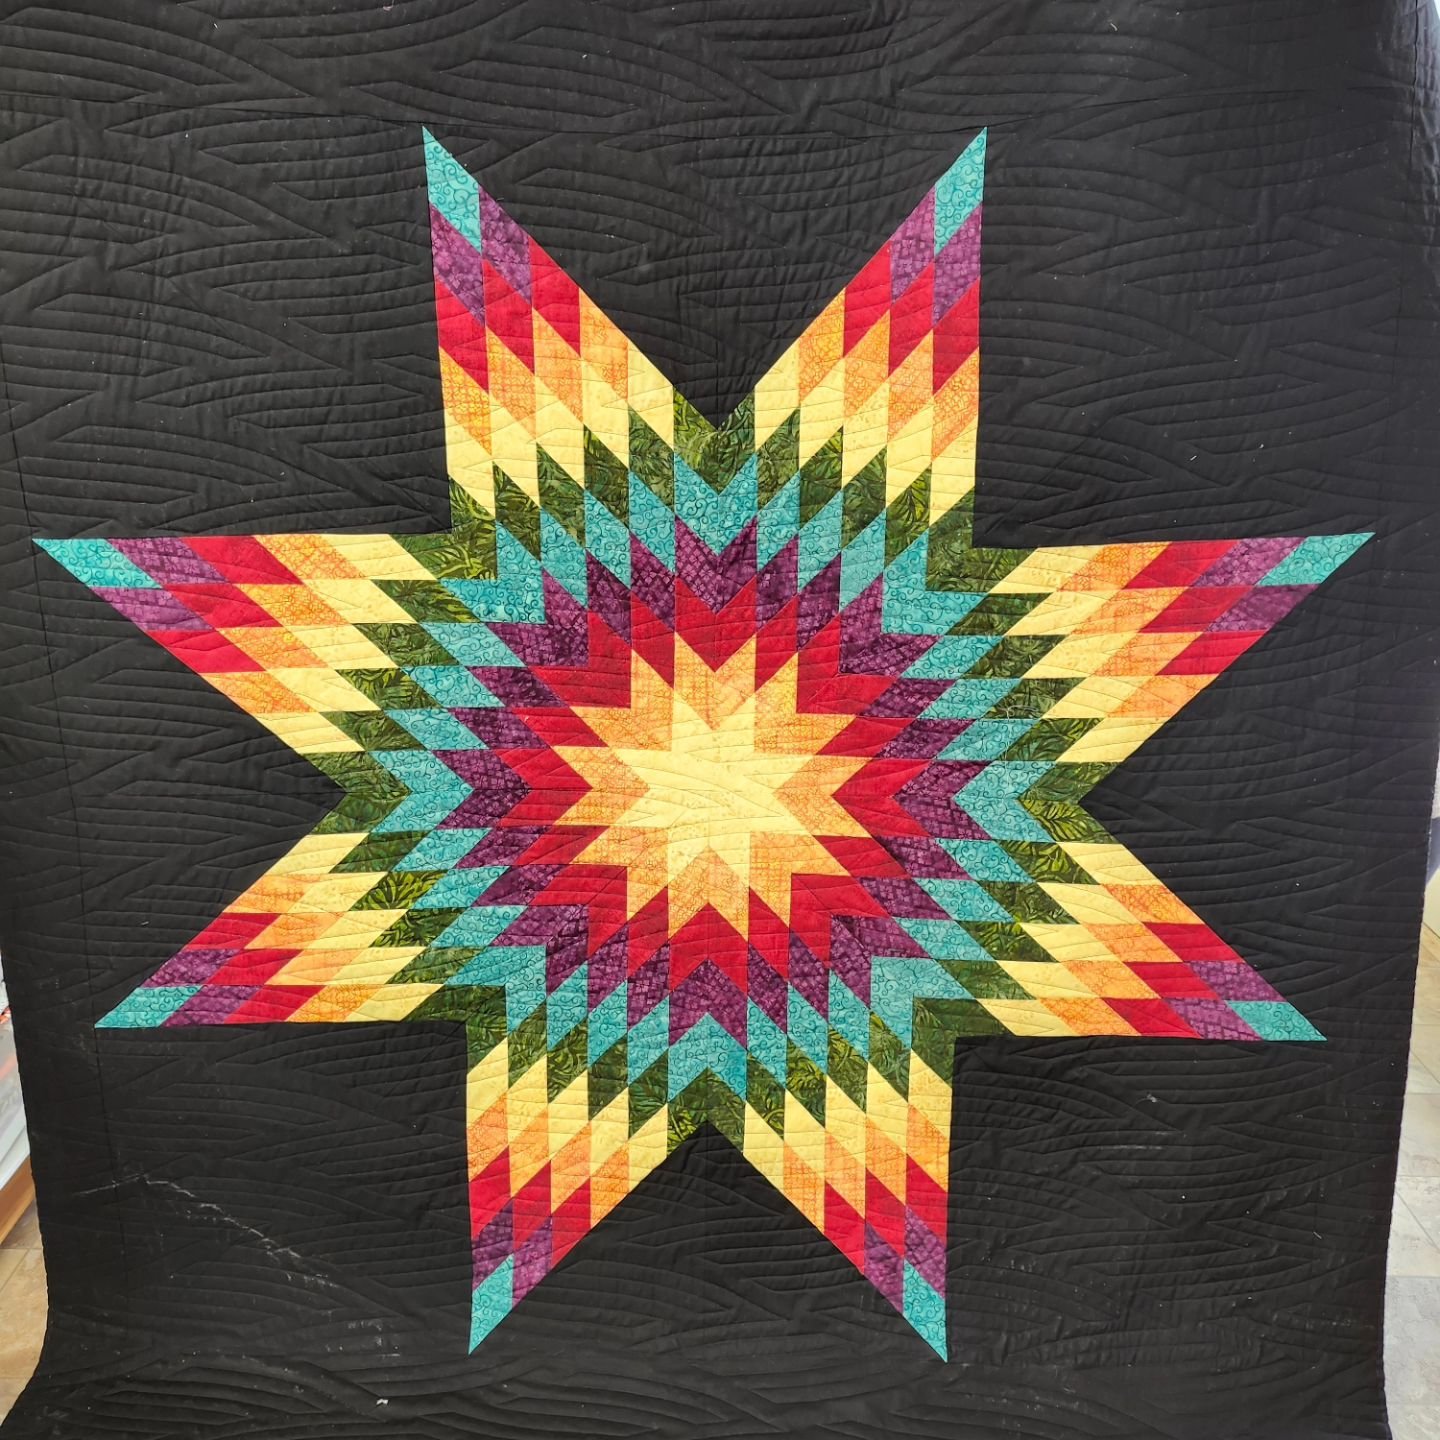 Sisters Charlene and Debbie were in today to longarm their Lone Star quilts from our class.  Charlene chose a pattern called 'basketweave illusion'. Debbie chose a pattern called 'surf' ##longarmmachinerentals ##quiltfun ##quiltyourselfawesome ##quil